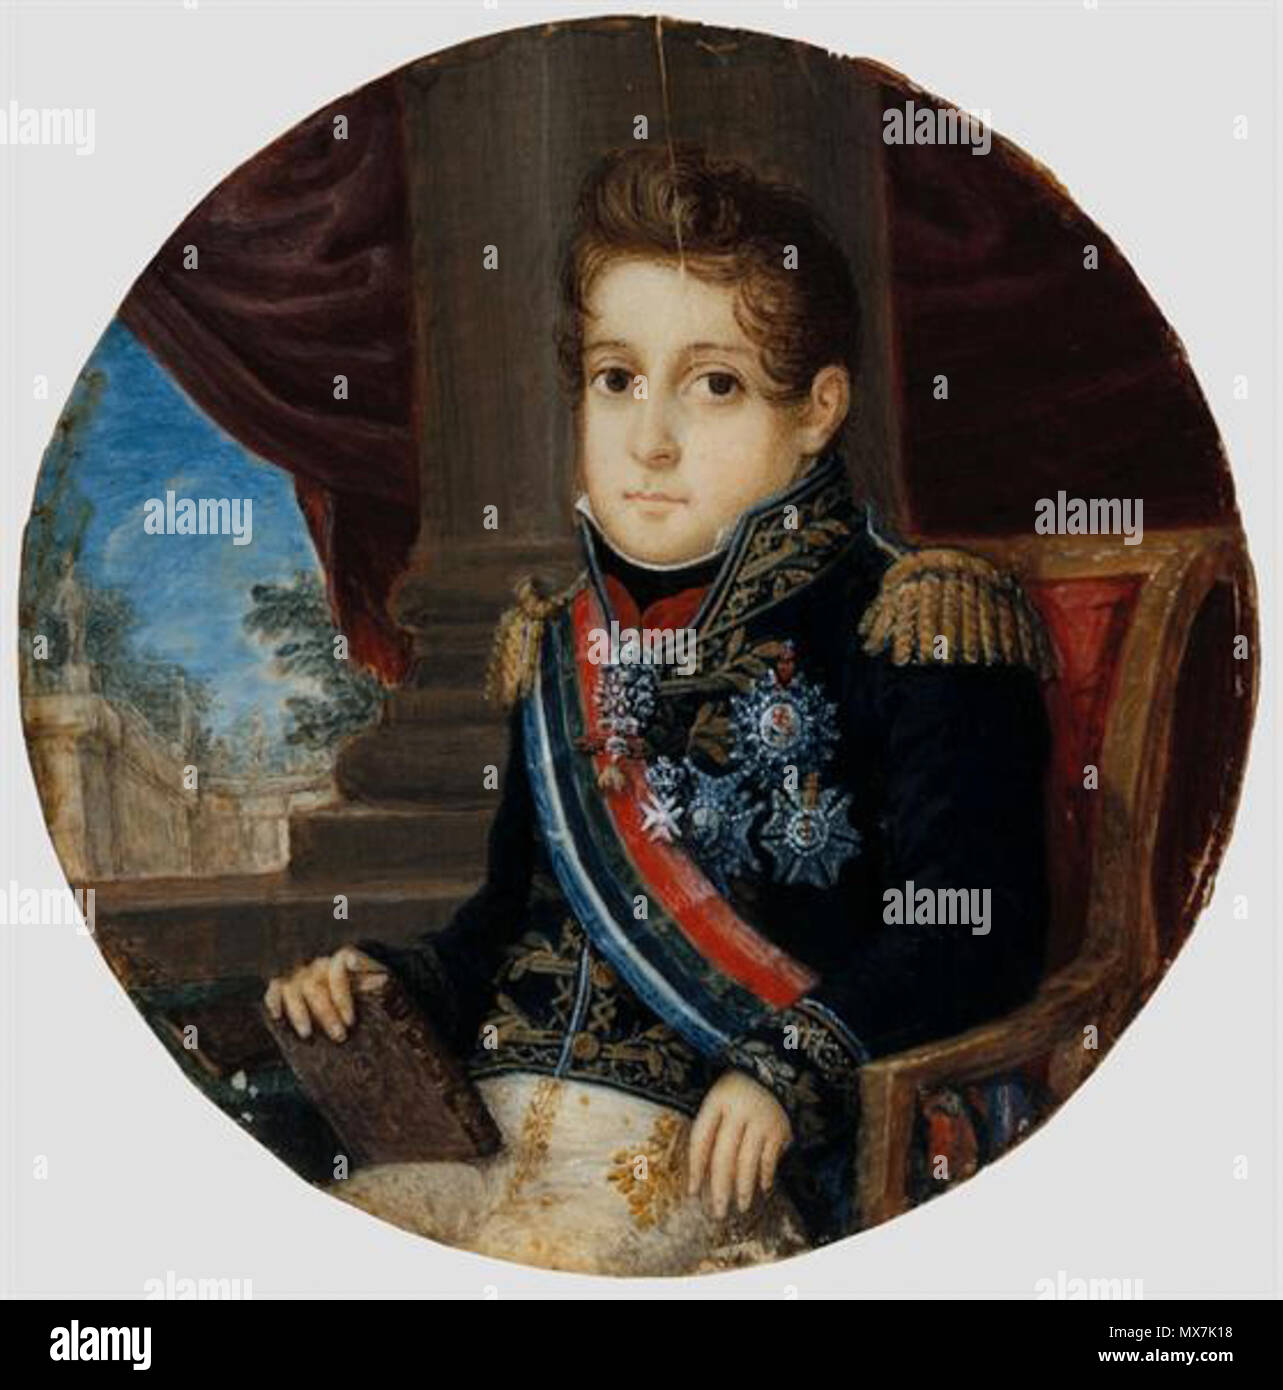 . English: Emperor Dom Pedro I of Brazil (and King Dom Pedro IV of Portugal) around age 11, c.1809. This a later portrait of him, since he is wearing an uniform from the time he was emperor (when he was a child the uniforms were red, not blue). It is located in the Museu Nacional de Arte Antiga. circa 1809. Unknown (18??-18??) 167 Dom Pedro I 1809d Stock Photo